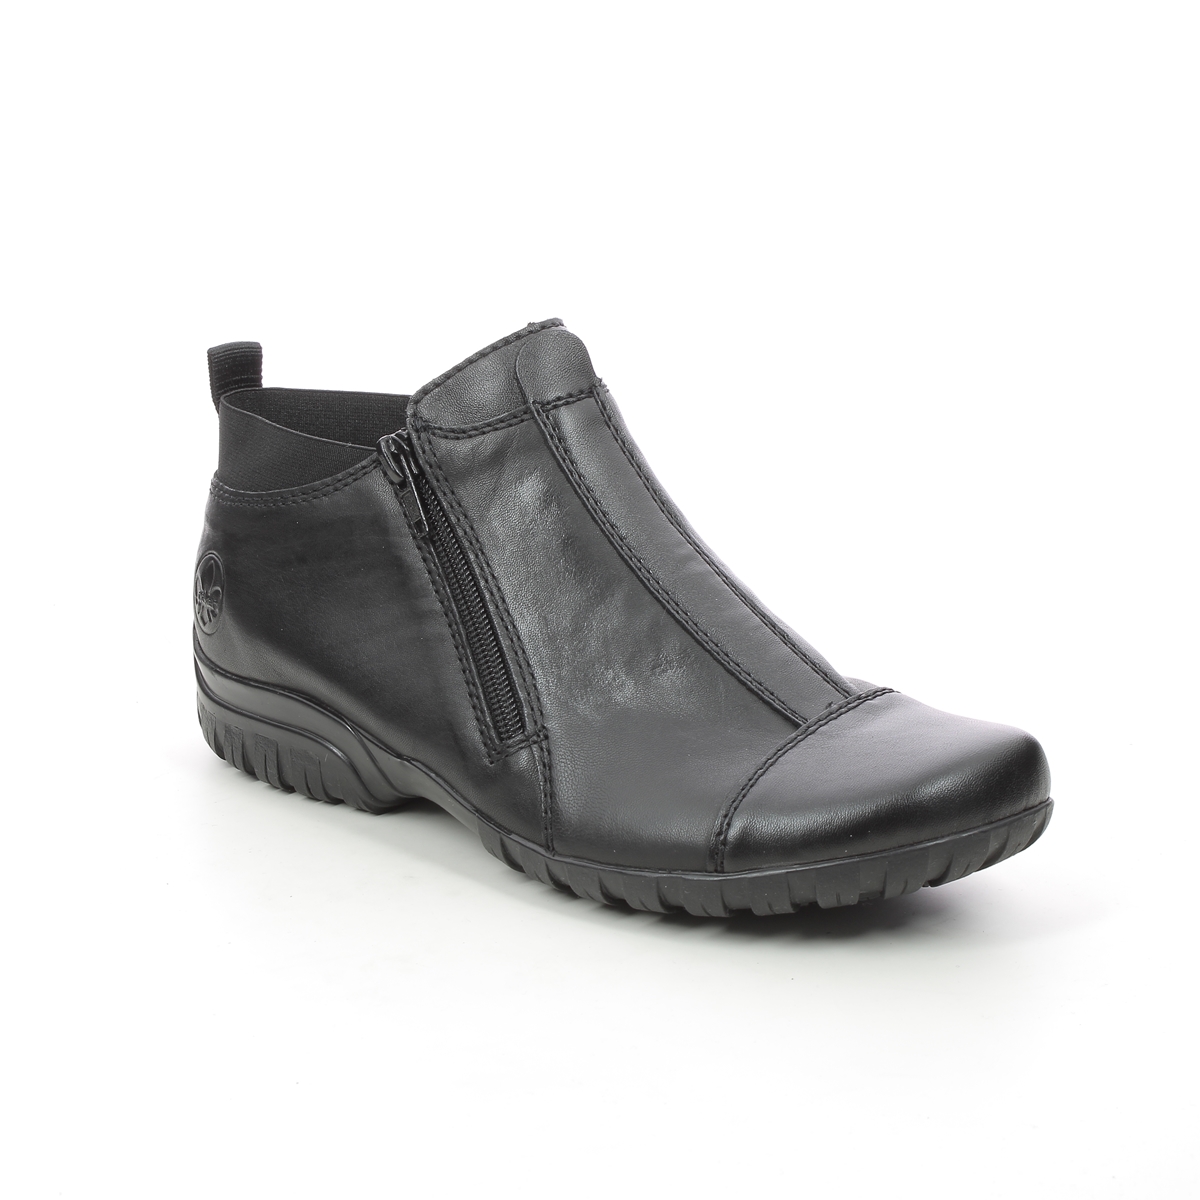 Rieker Birbocap 15 Black Leather Womens Ankle Boots L4653-00 In Size 38 In Plain Black Leather